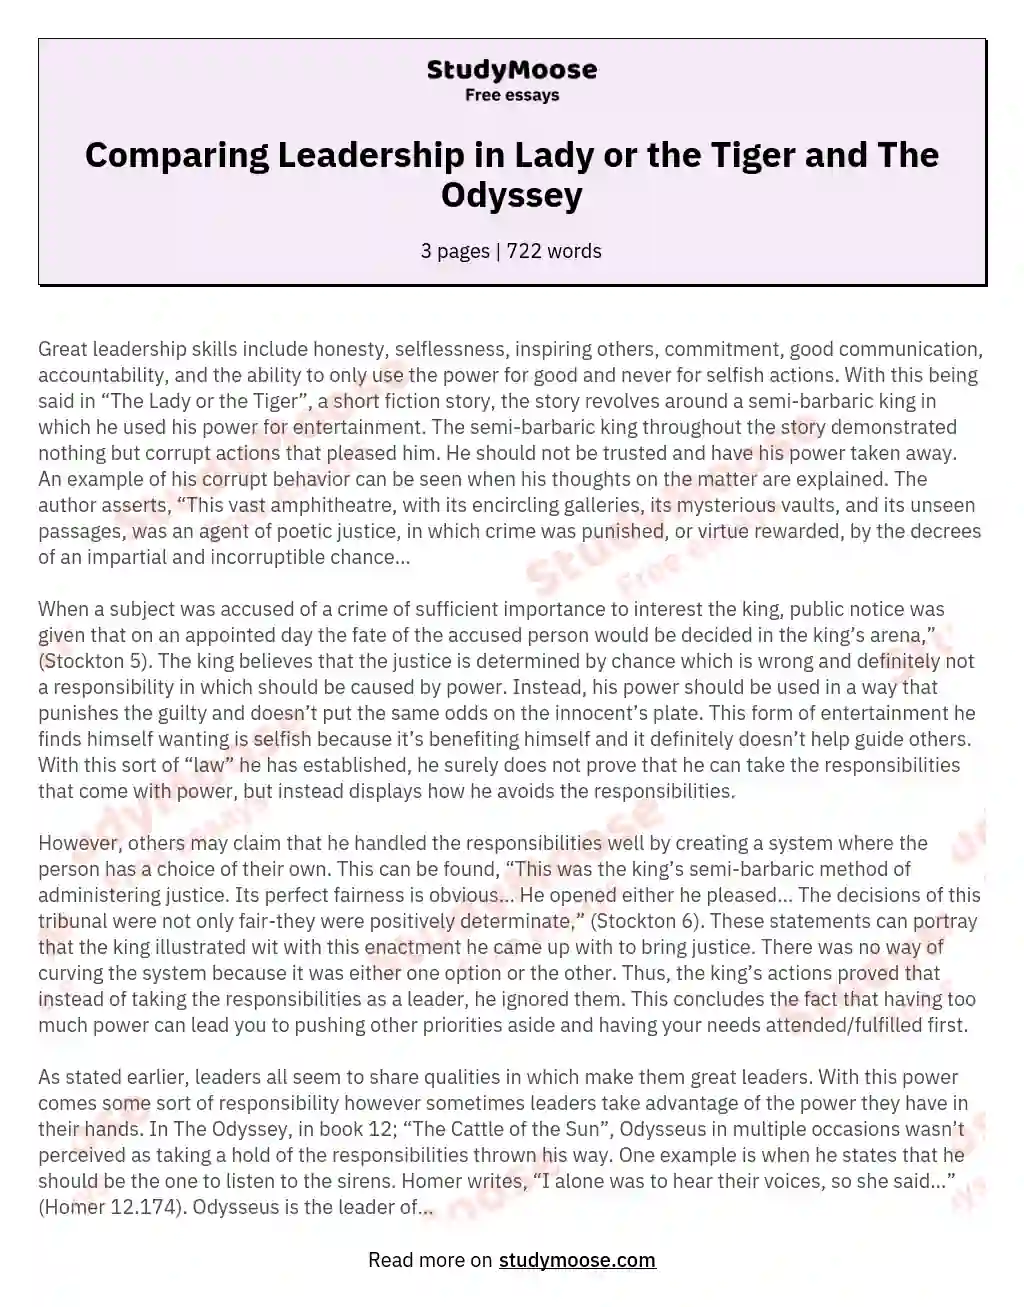 Comparing Leadership in Lady or the Tiger and The Odyssey essay